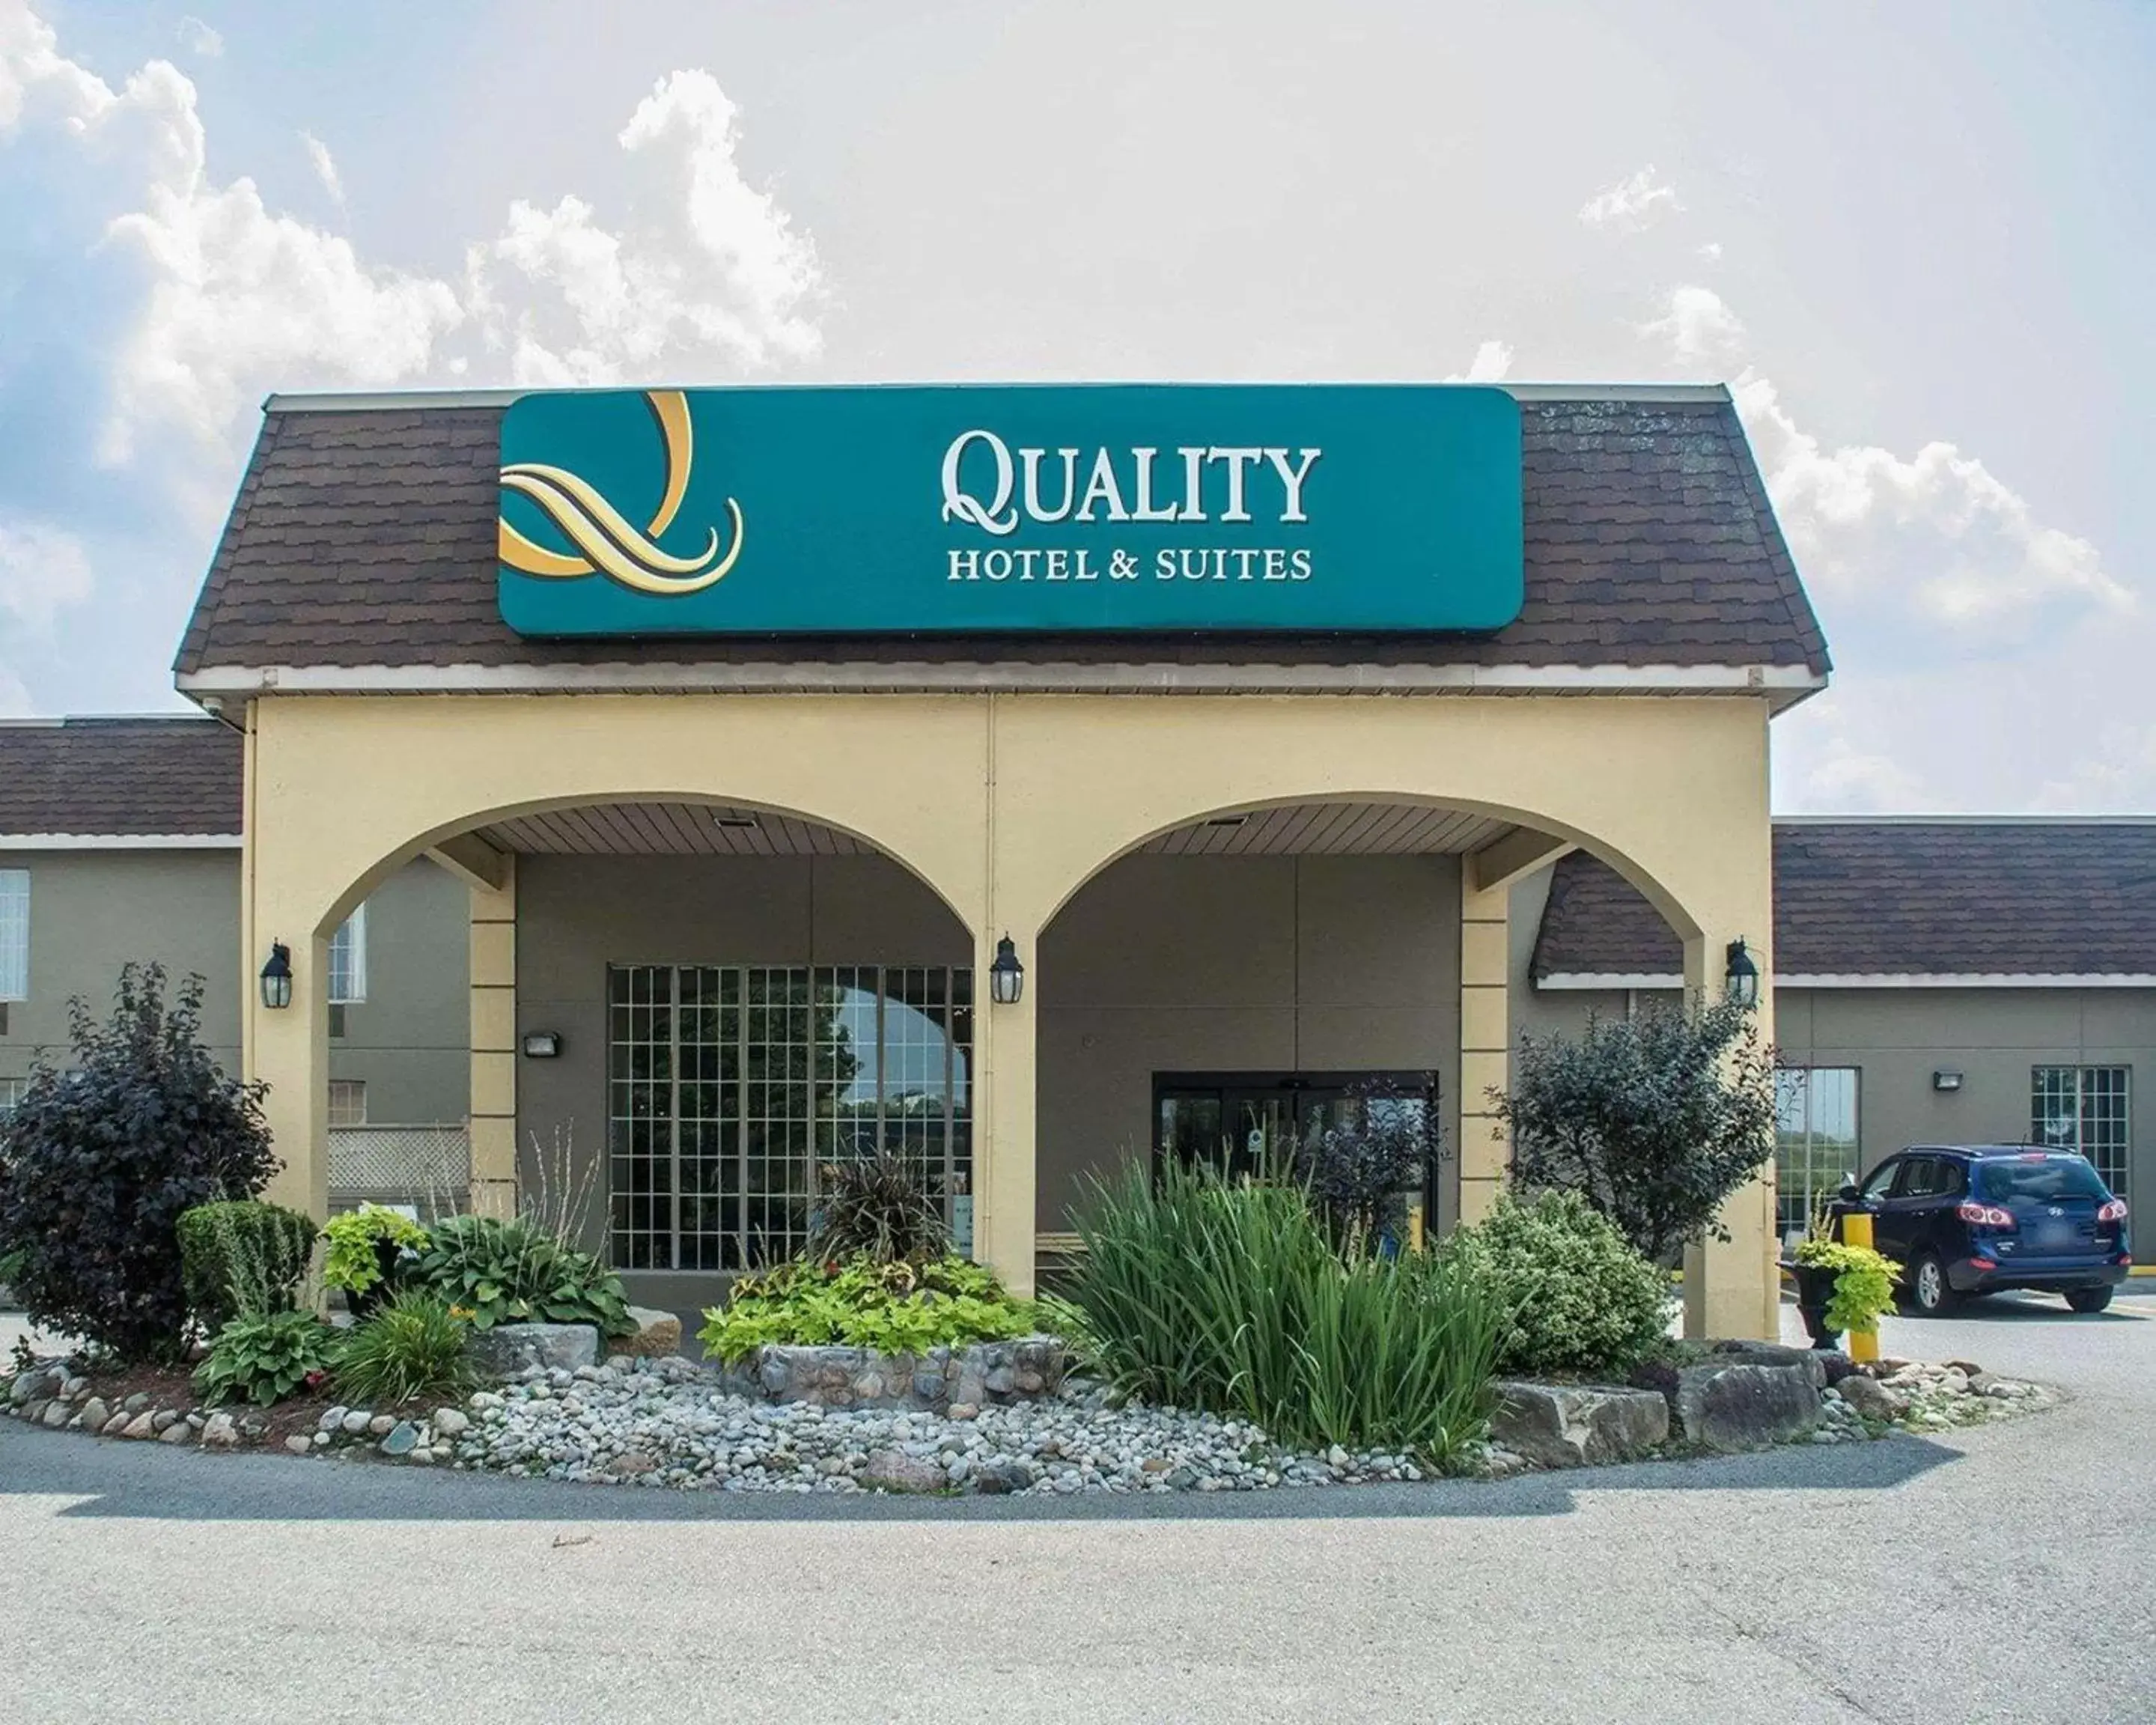 Property Building in Quality Hotel & Suites Woodstock